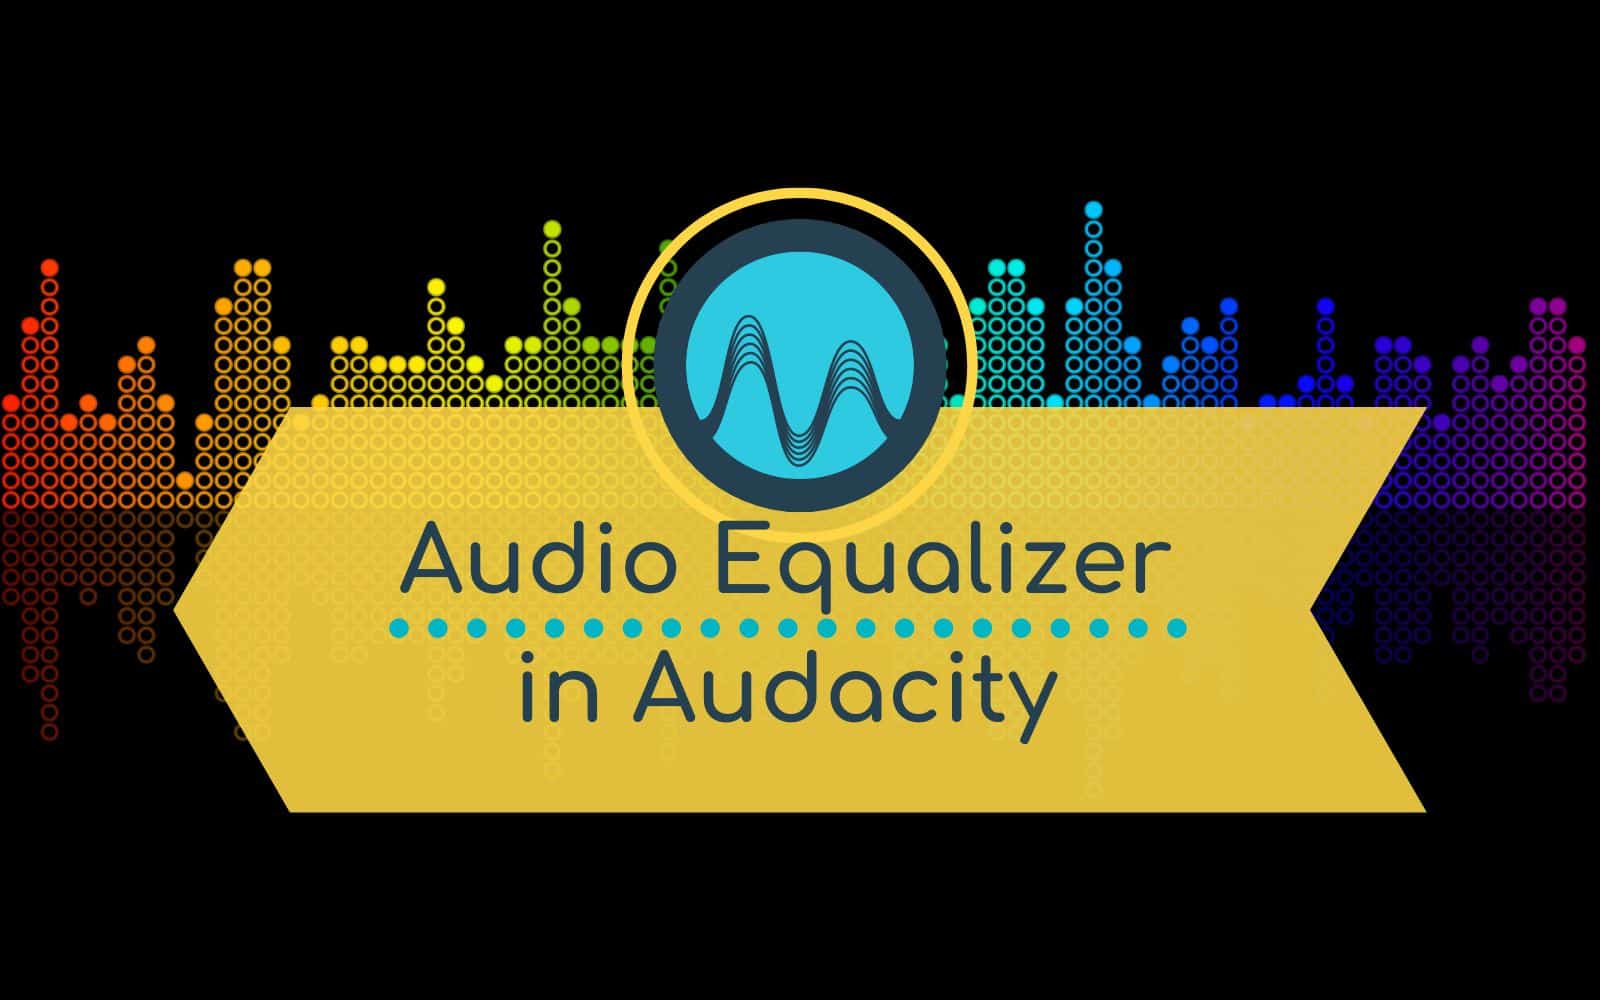 How To Use The Audio Equalizer In Audacity? | Audacity Tutorial For Beginners